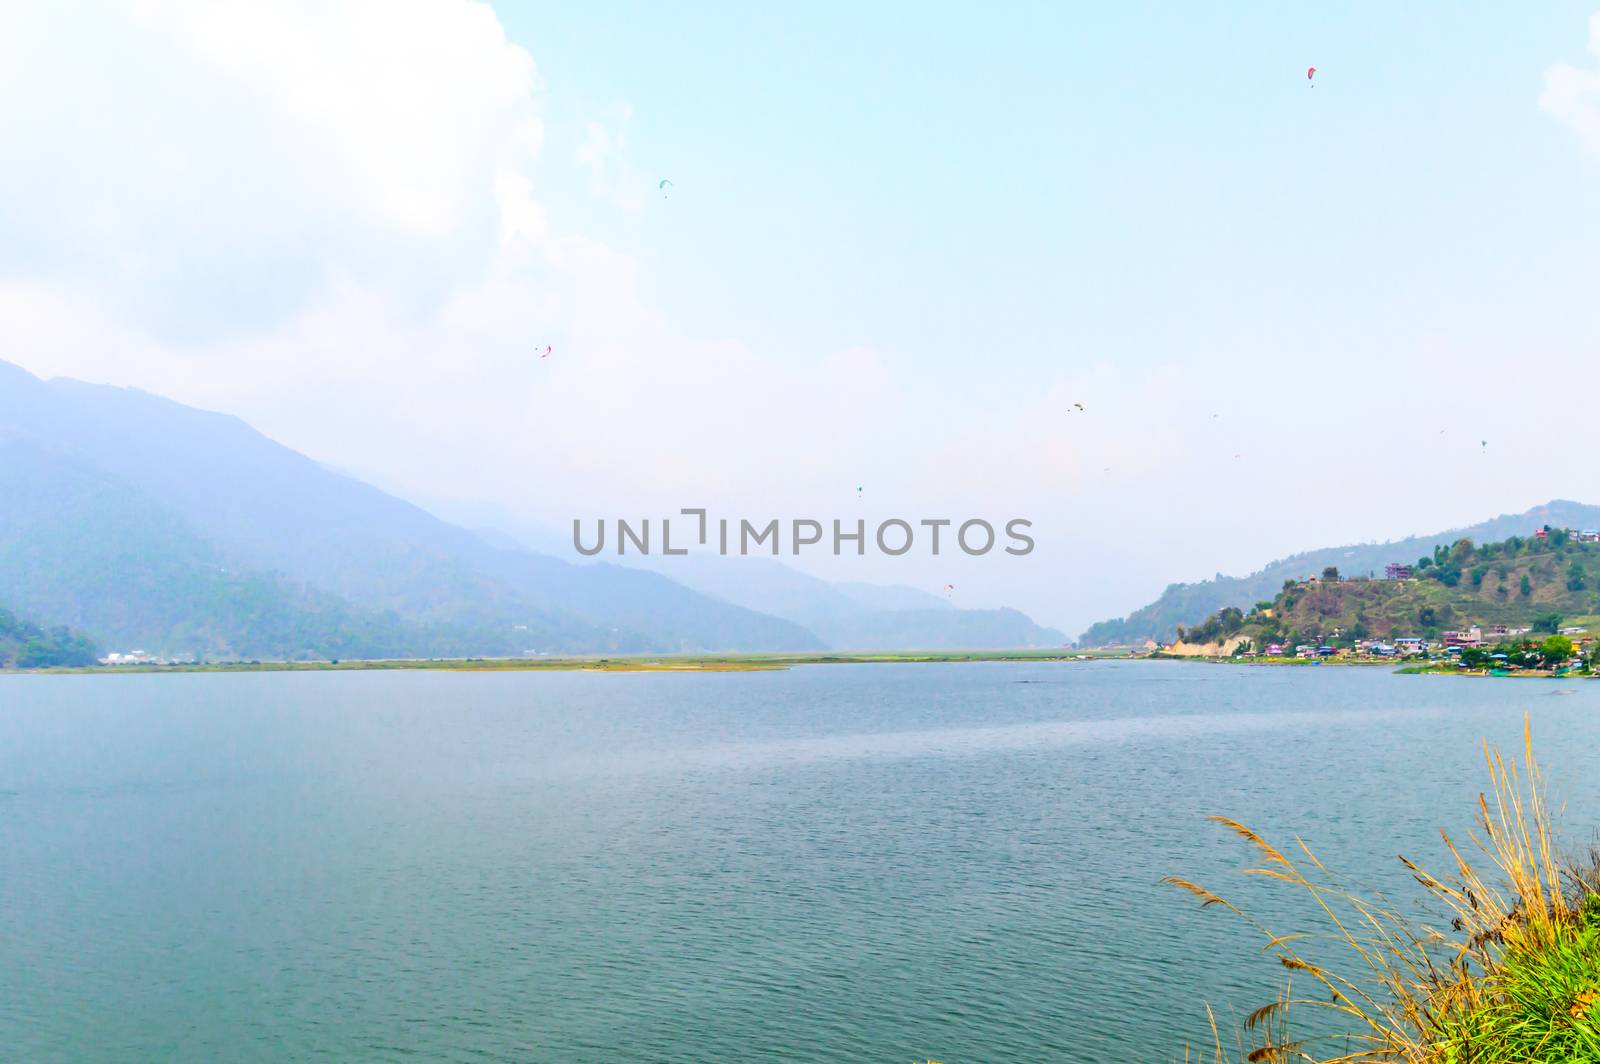 Photograph of sky, lake, mountain and reflexion Near Pokhara Lake at Kathmandu Nepal. Snap in portrait, landscape, wide screen. Vintage film look. Nature Freedom, Travel, Energy, Environment Concept. by sudiptabhowmick